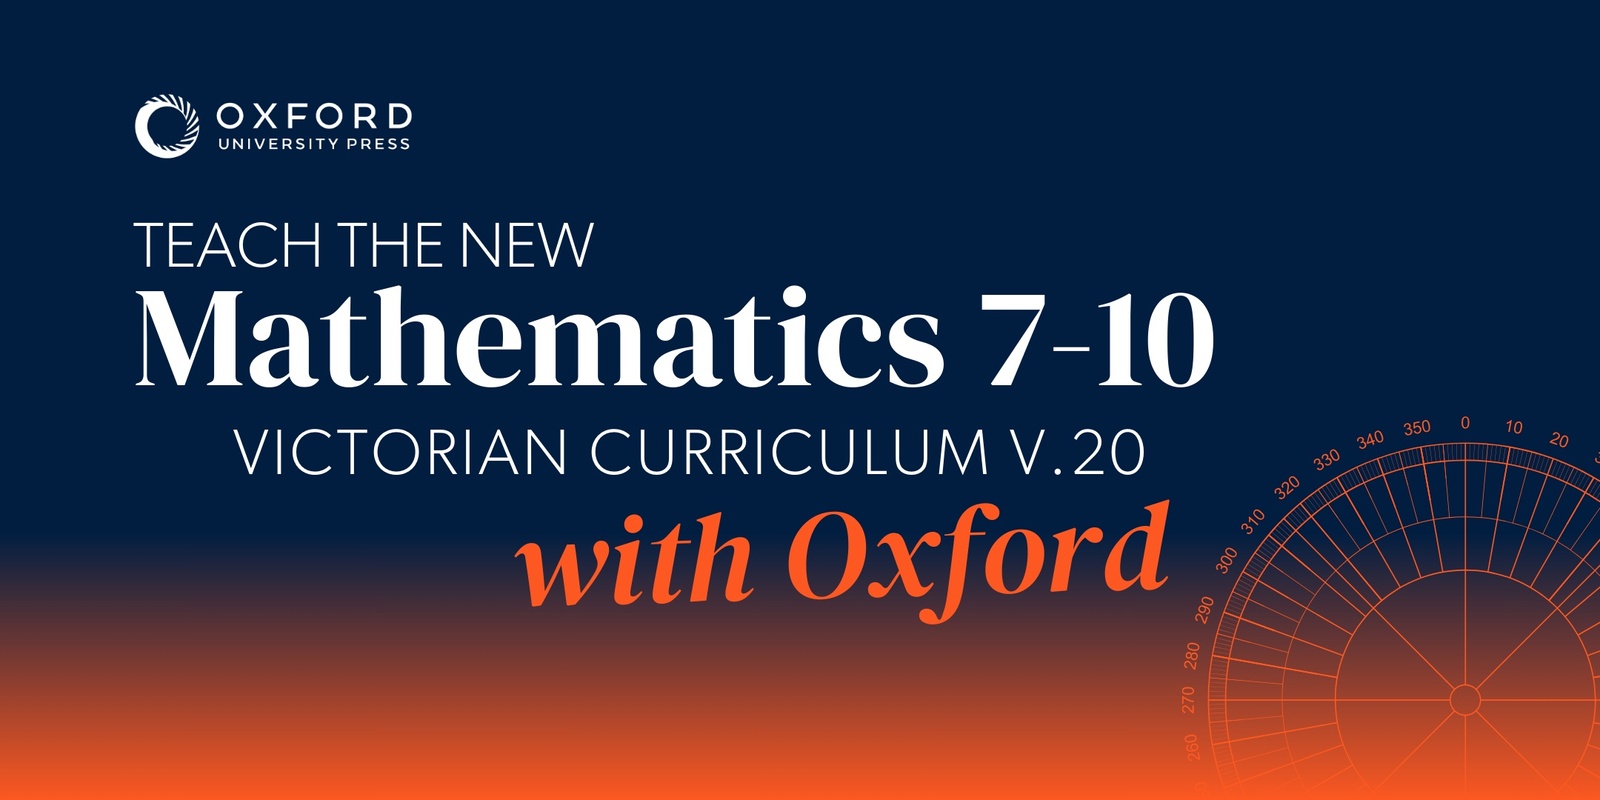 Banner image for Teach the new Mathematics 7-10 Victorian Curriculum V2.0 with Oxford